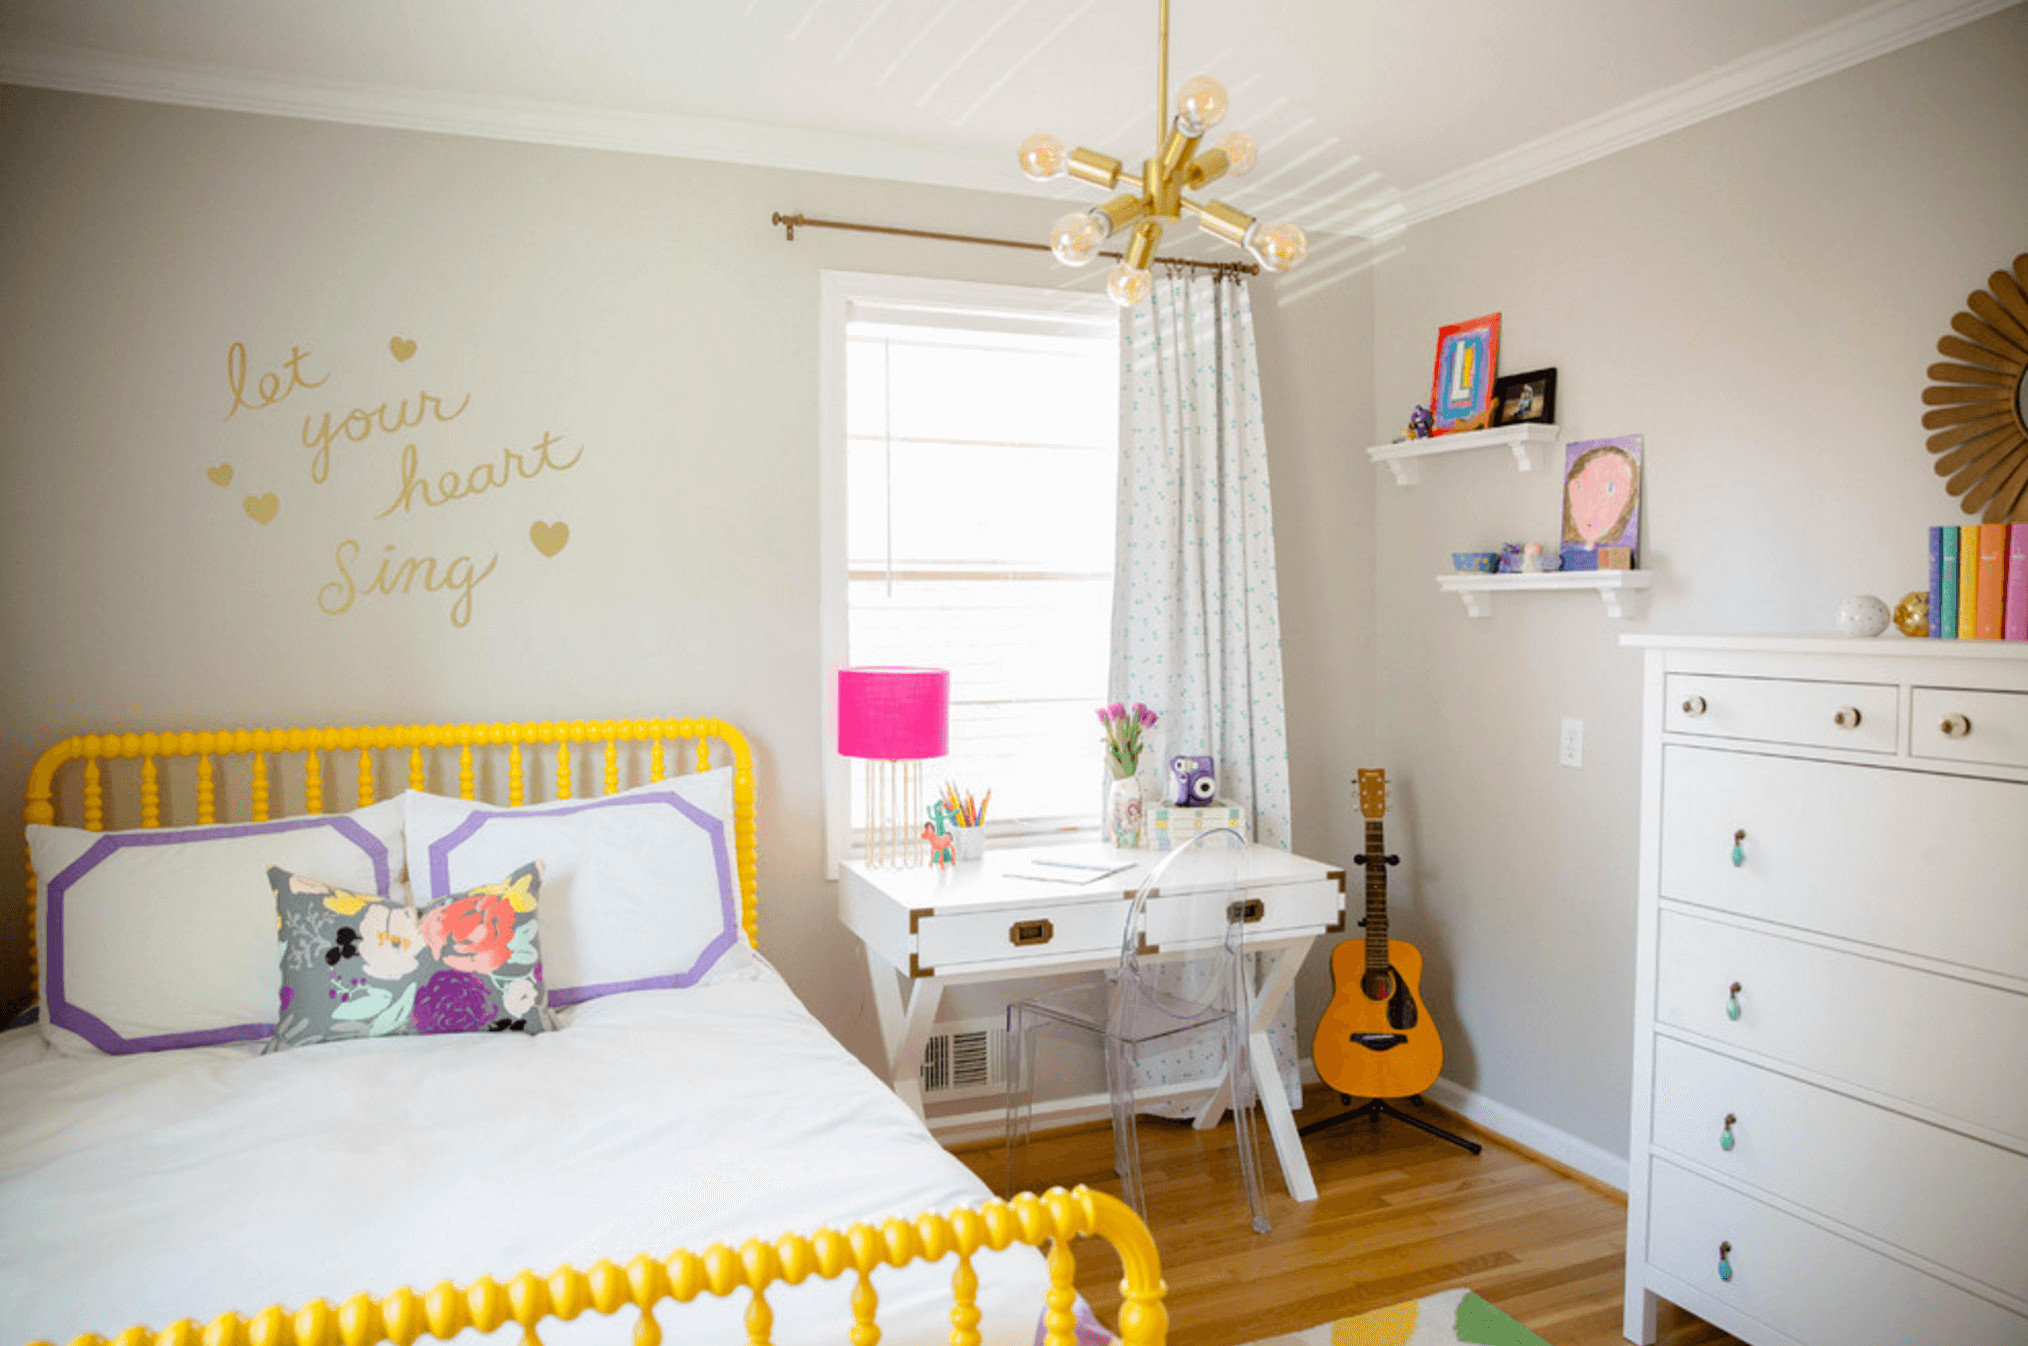 Ideas For Kids Bedrooms
 28 Ideas for Adding Color to a Kids Room